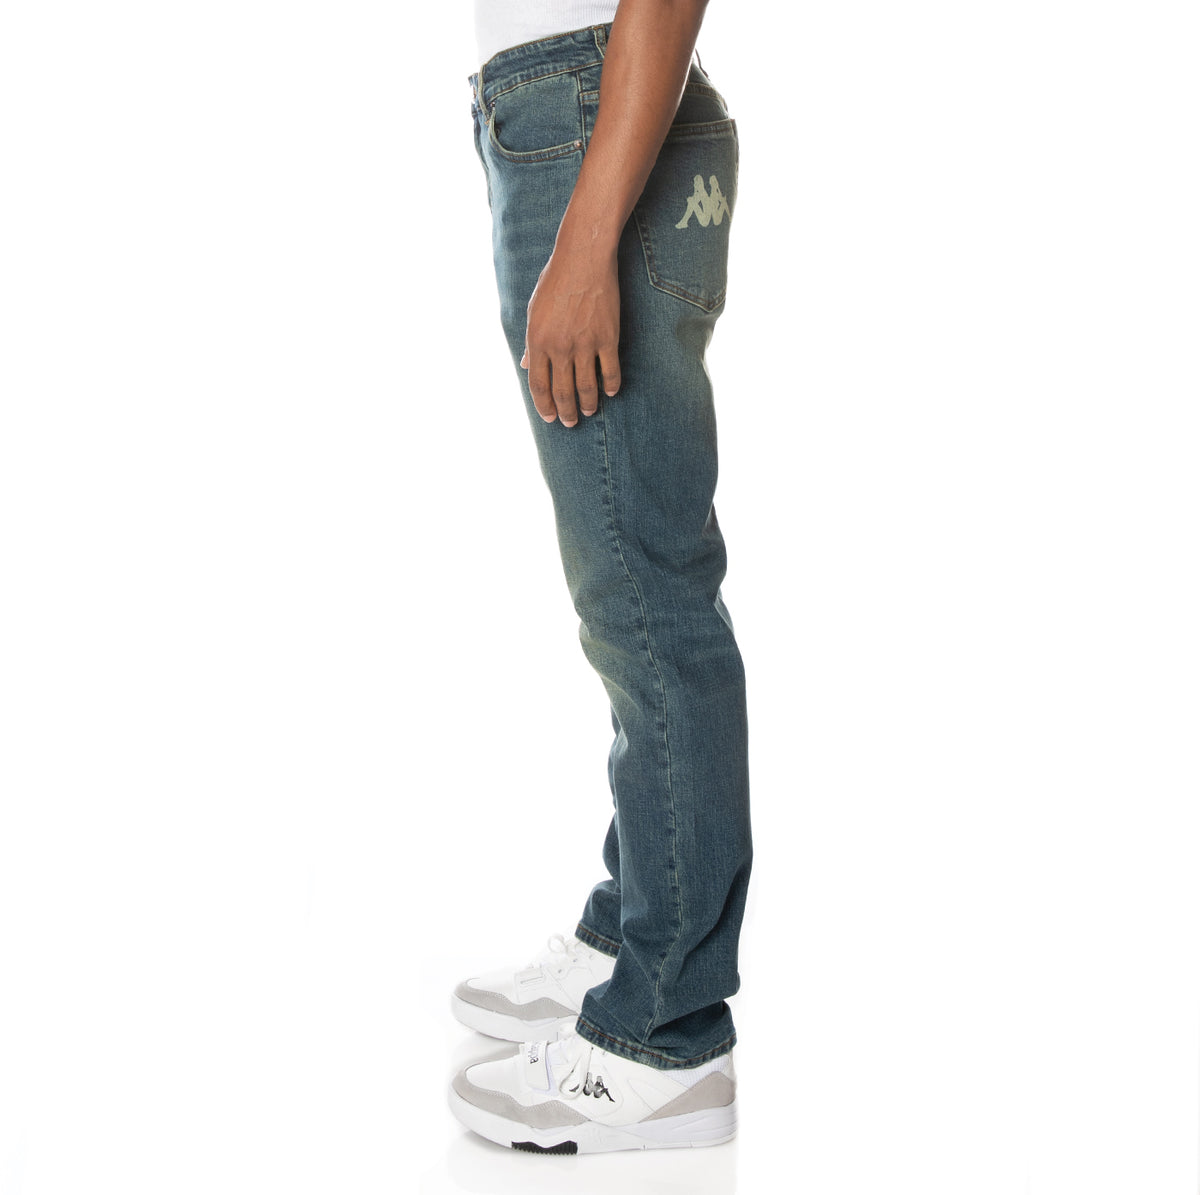 Shop at Authentic Jean - Medium Wash Kappa US . Find the latest trends products, brands and brands online today